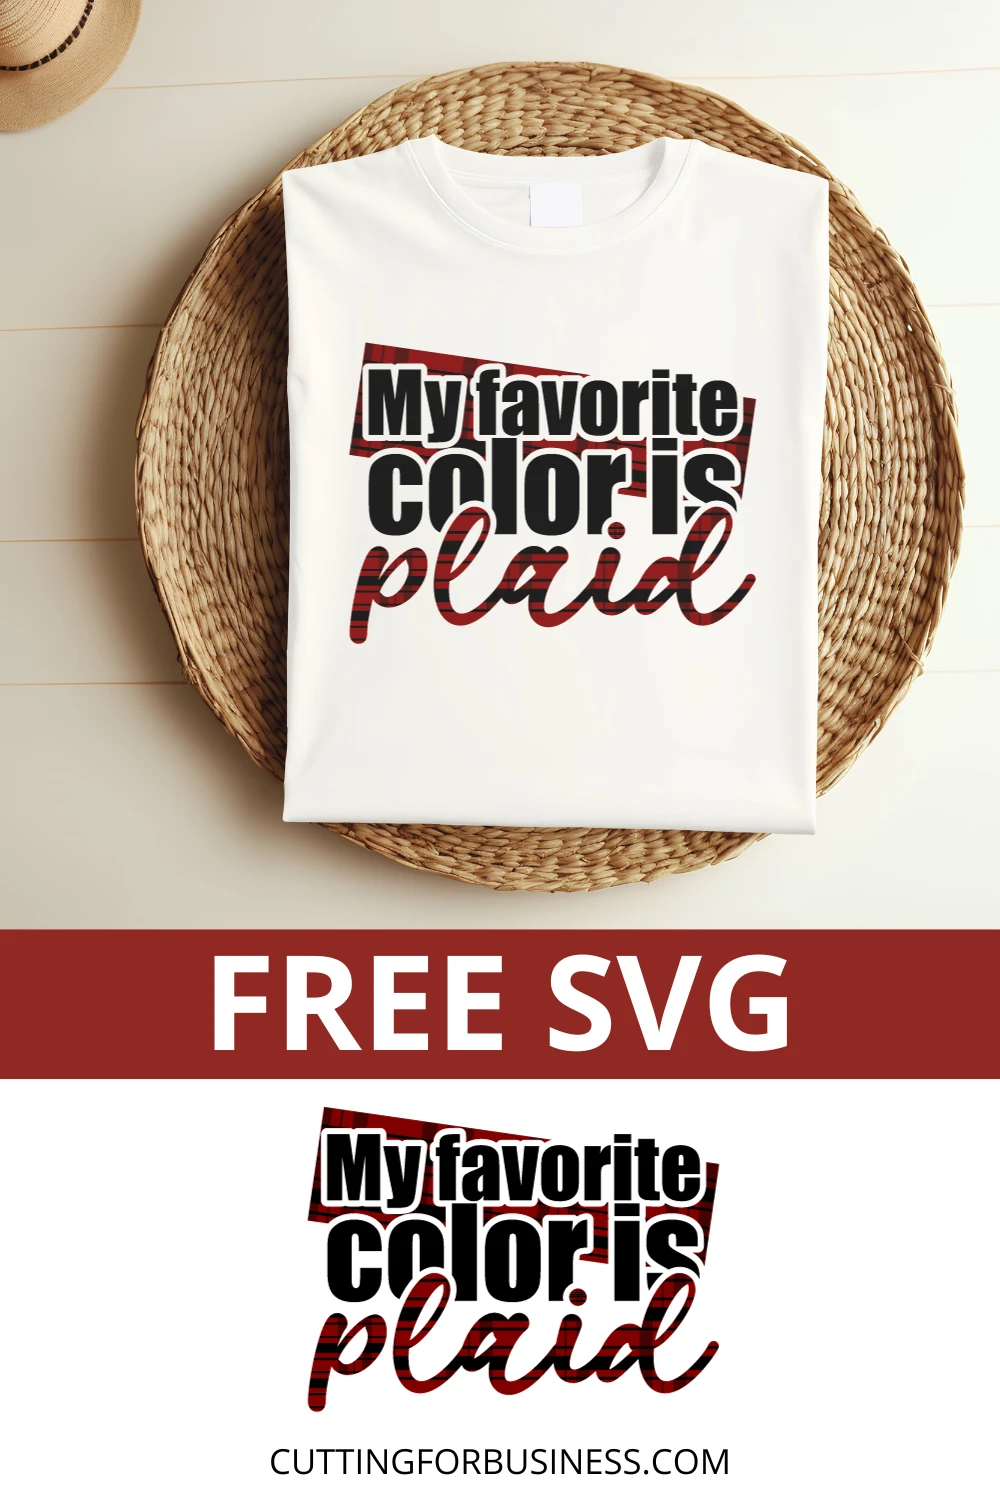 Free My Favorite Color is Plaid SVG - cuttingforbusiness.com